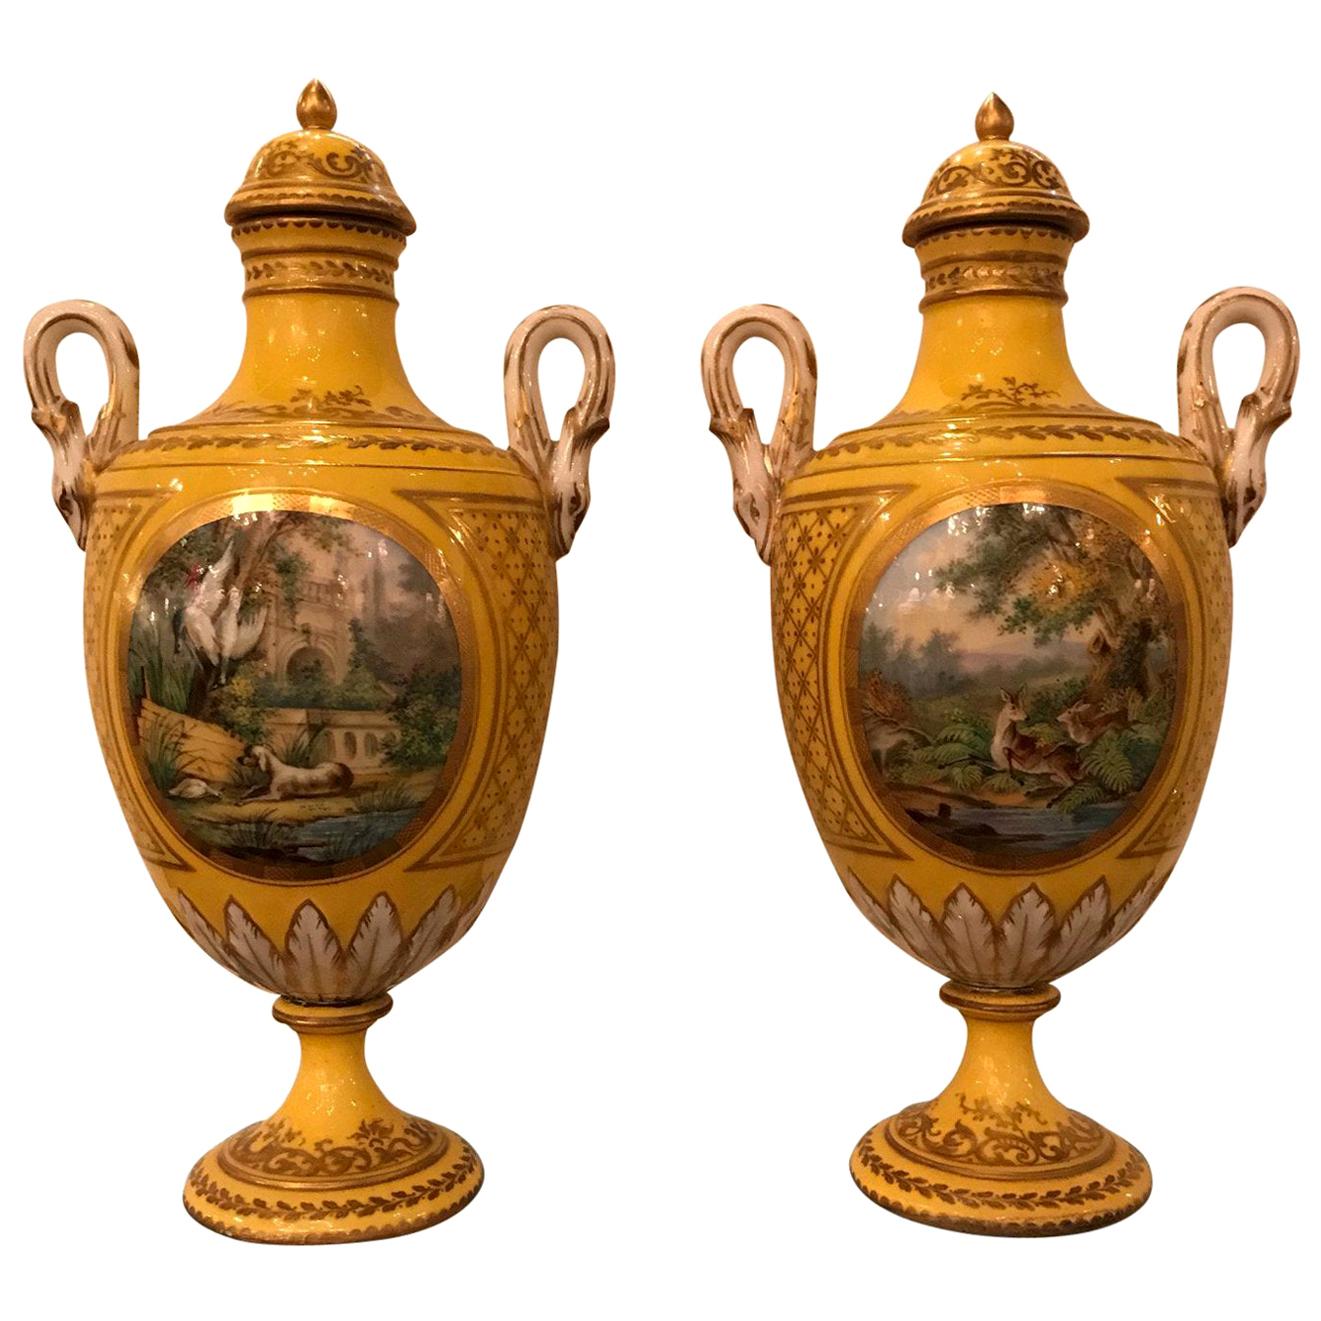 Pair of 19th Century Hand Painted French Porcelain Lidded Urns